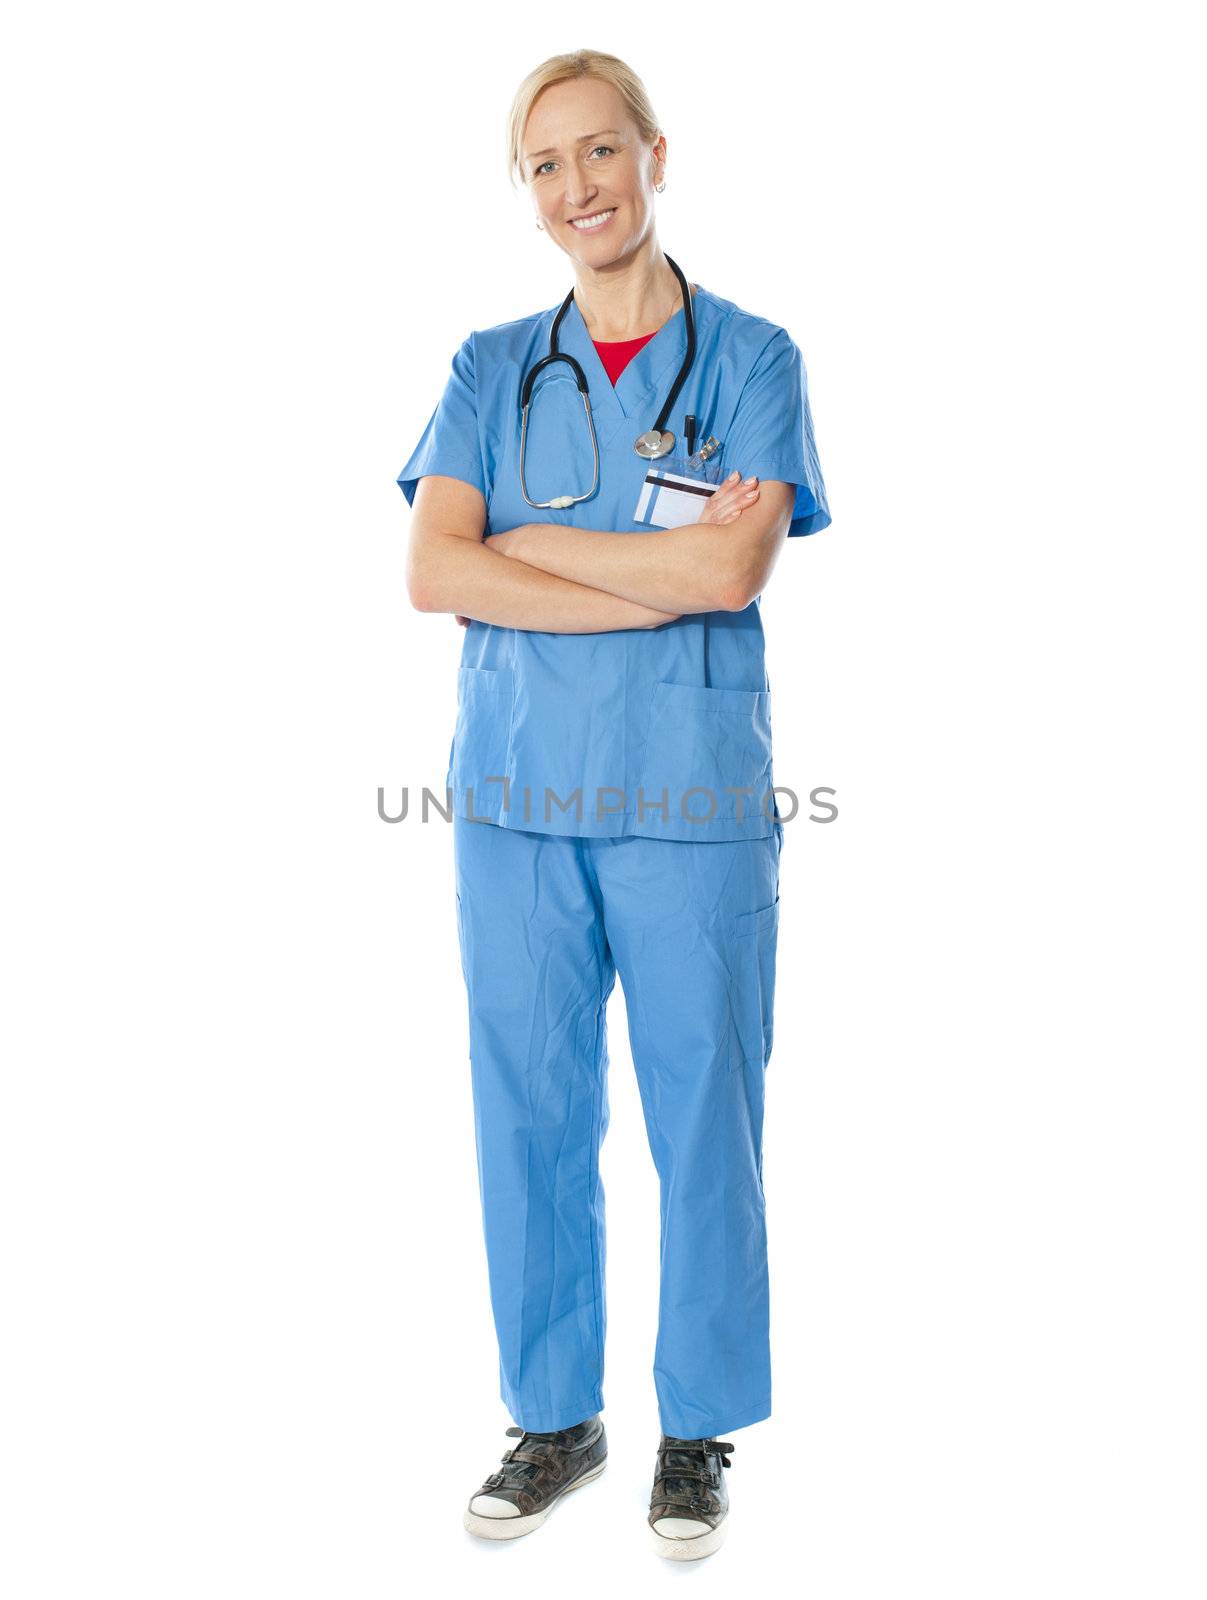 Aged medical professional with stethoscope by stockyimages